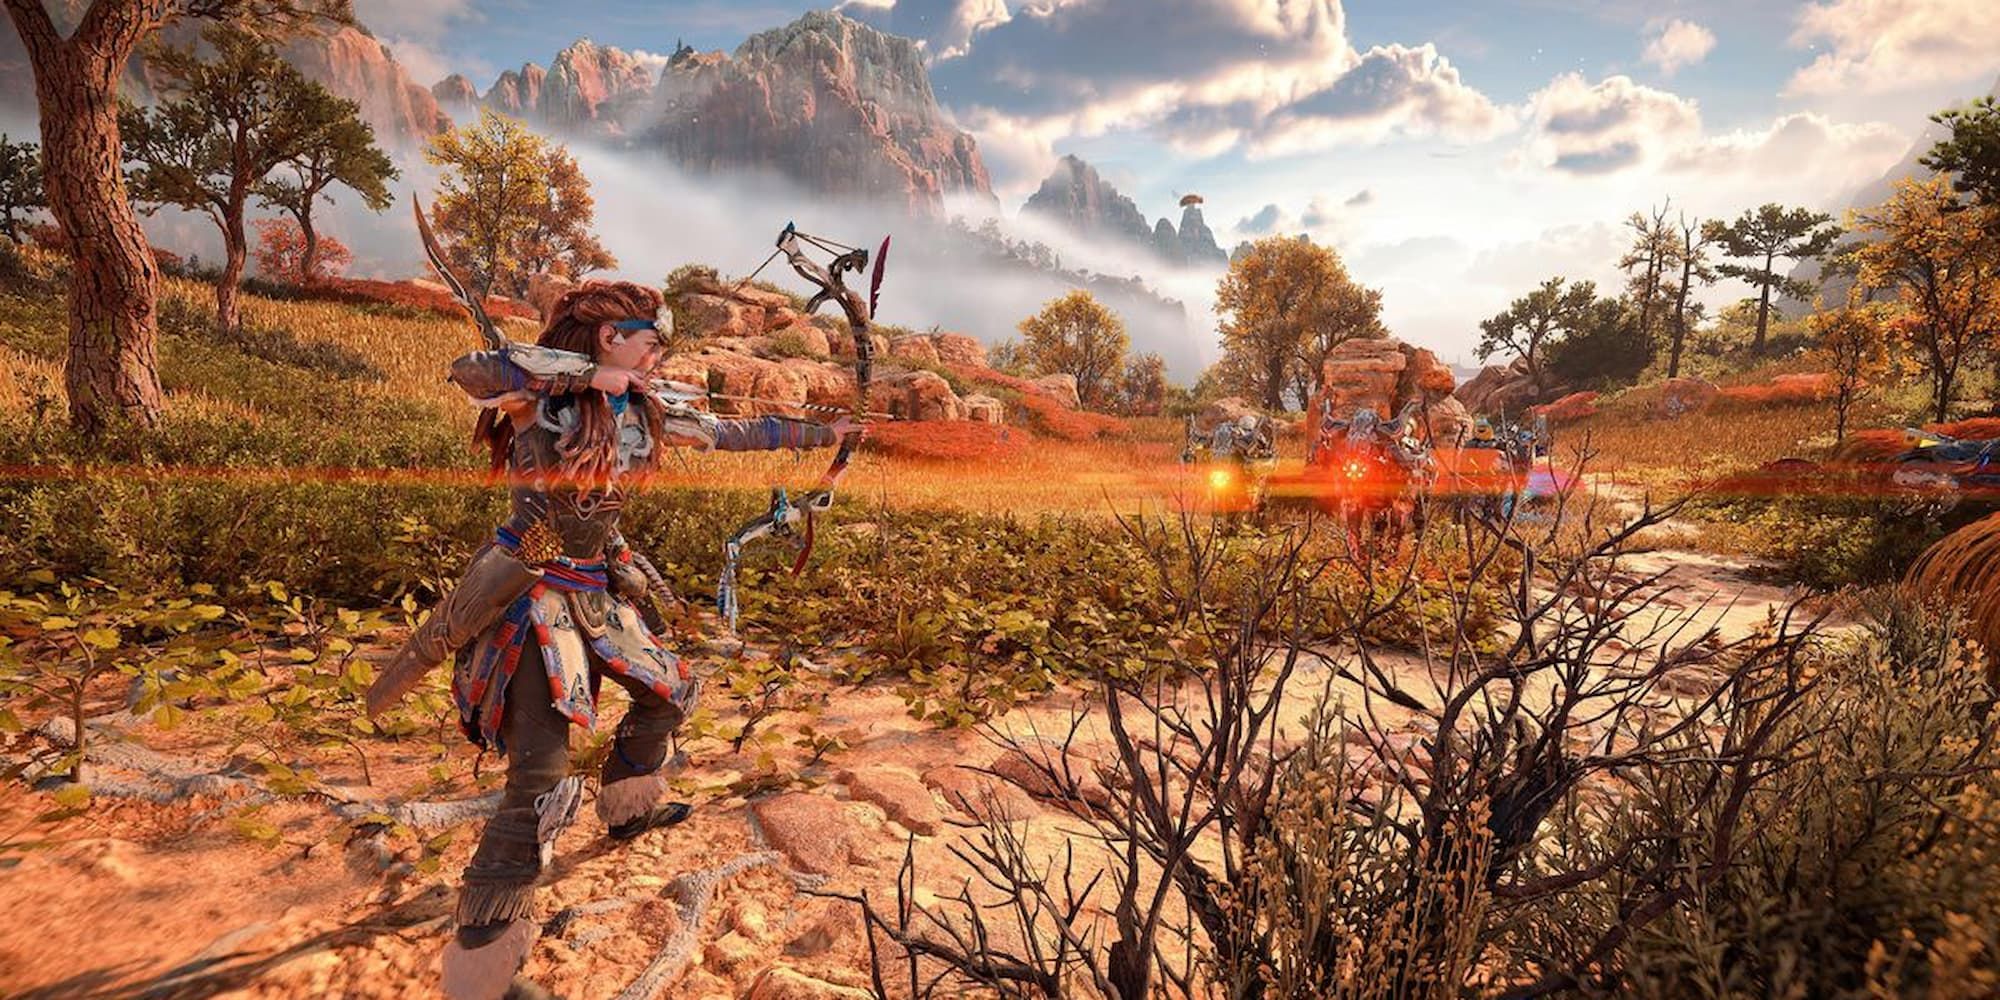 Aloy aims her bow at a mechanical creature in Horizon Forbidden West..